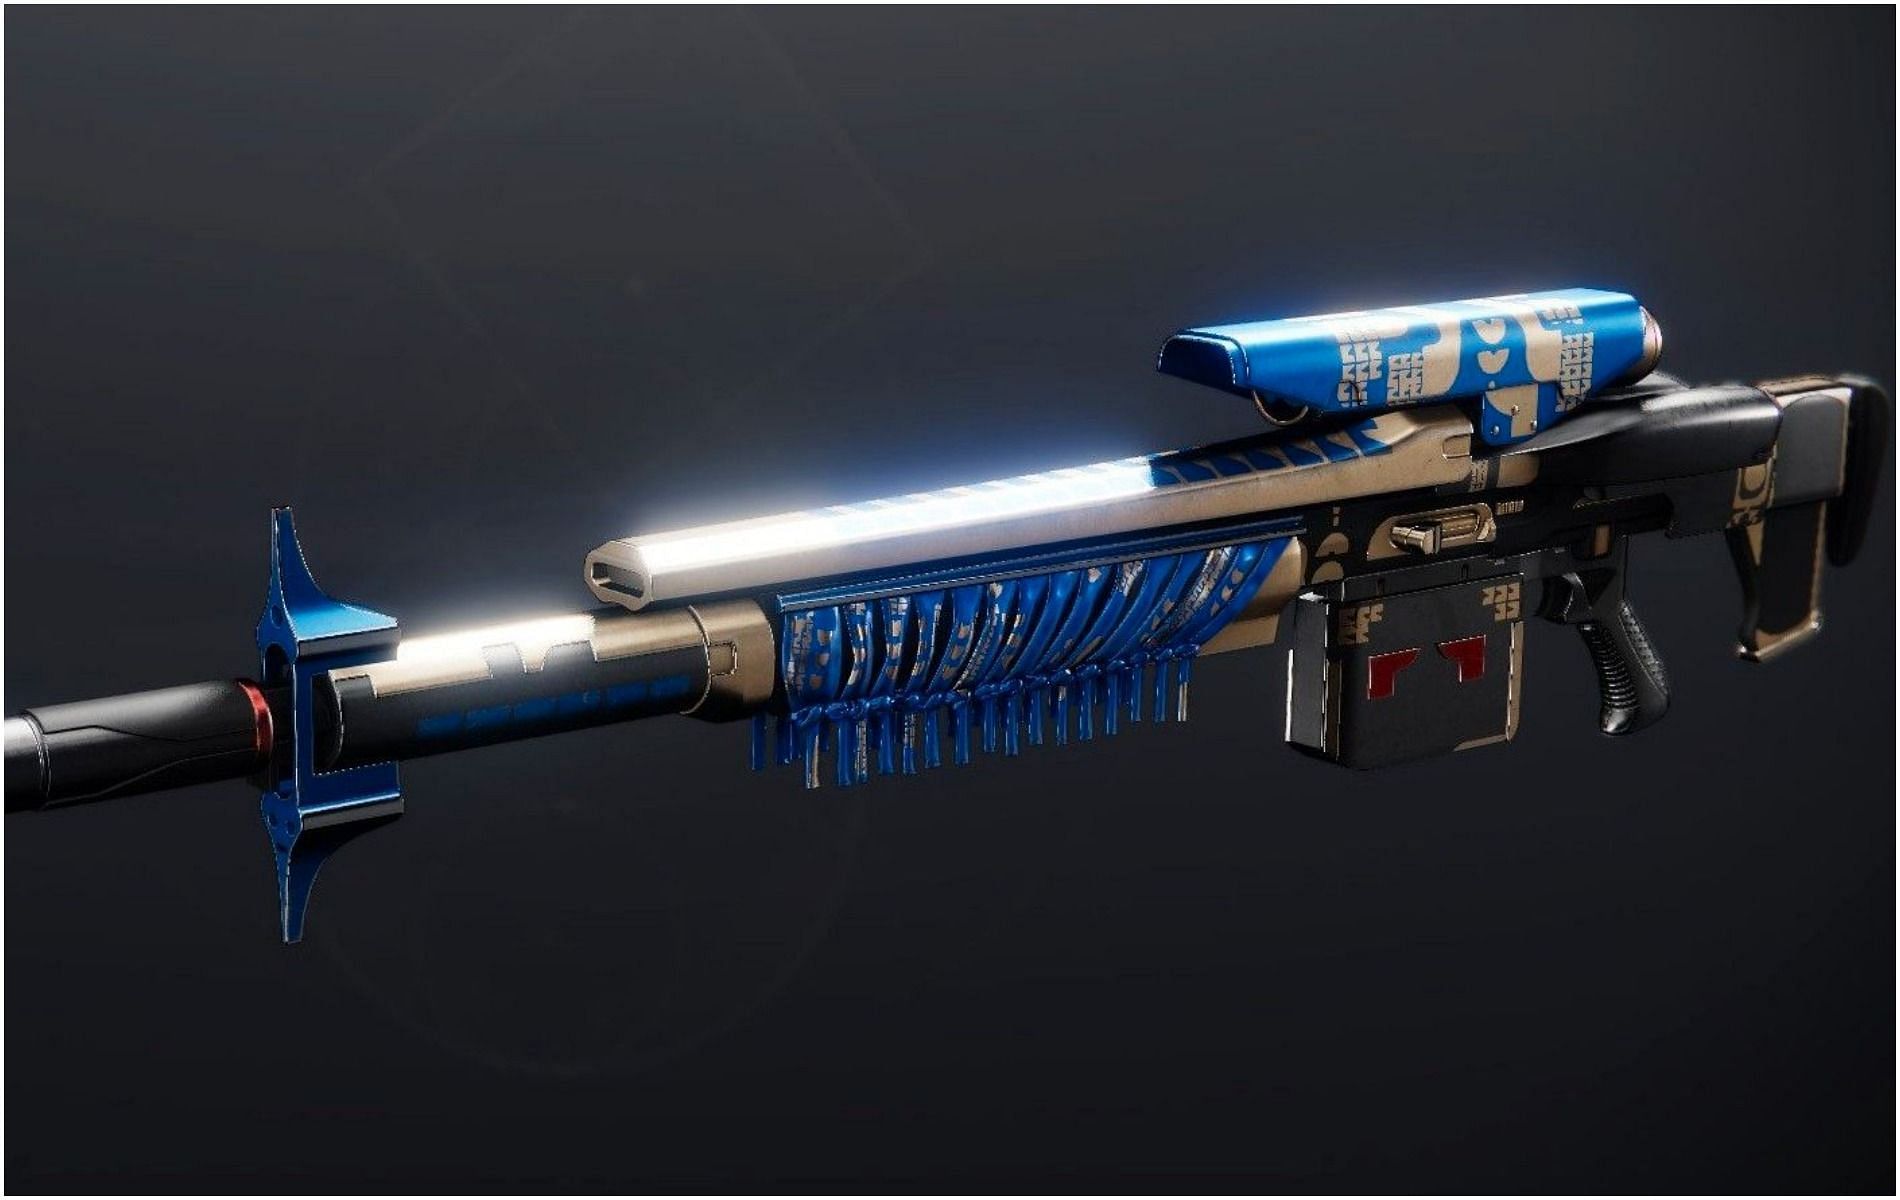 Getting the Thoughtless Sniper Rifle and its pattern in Destiny 2 The Witch Queen (Image via Destiny 2)